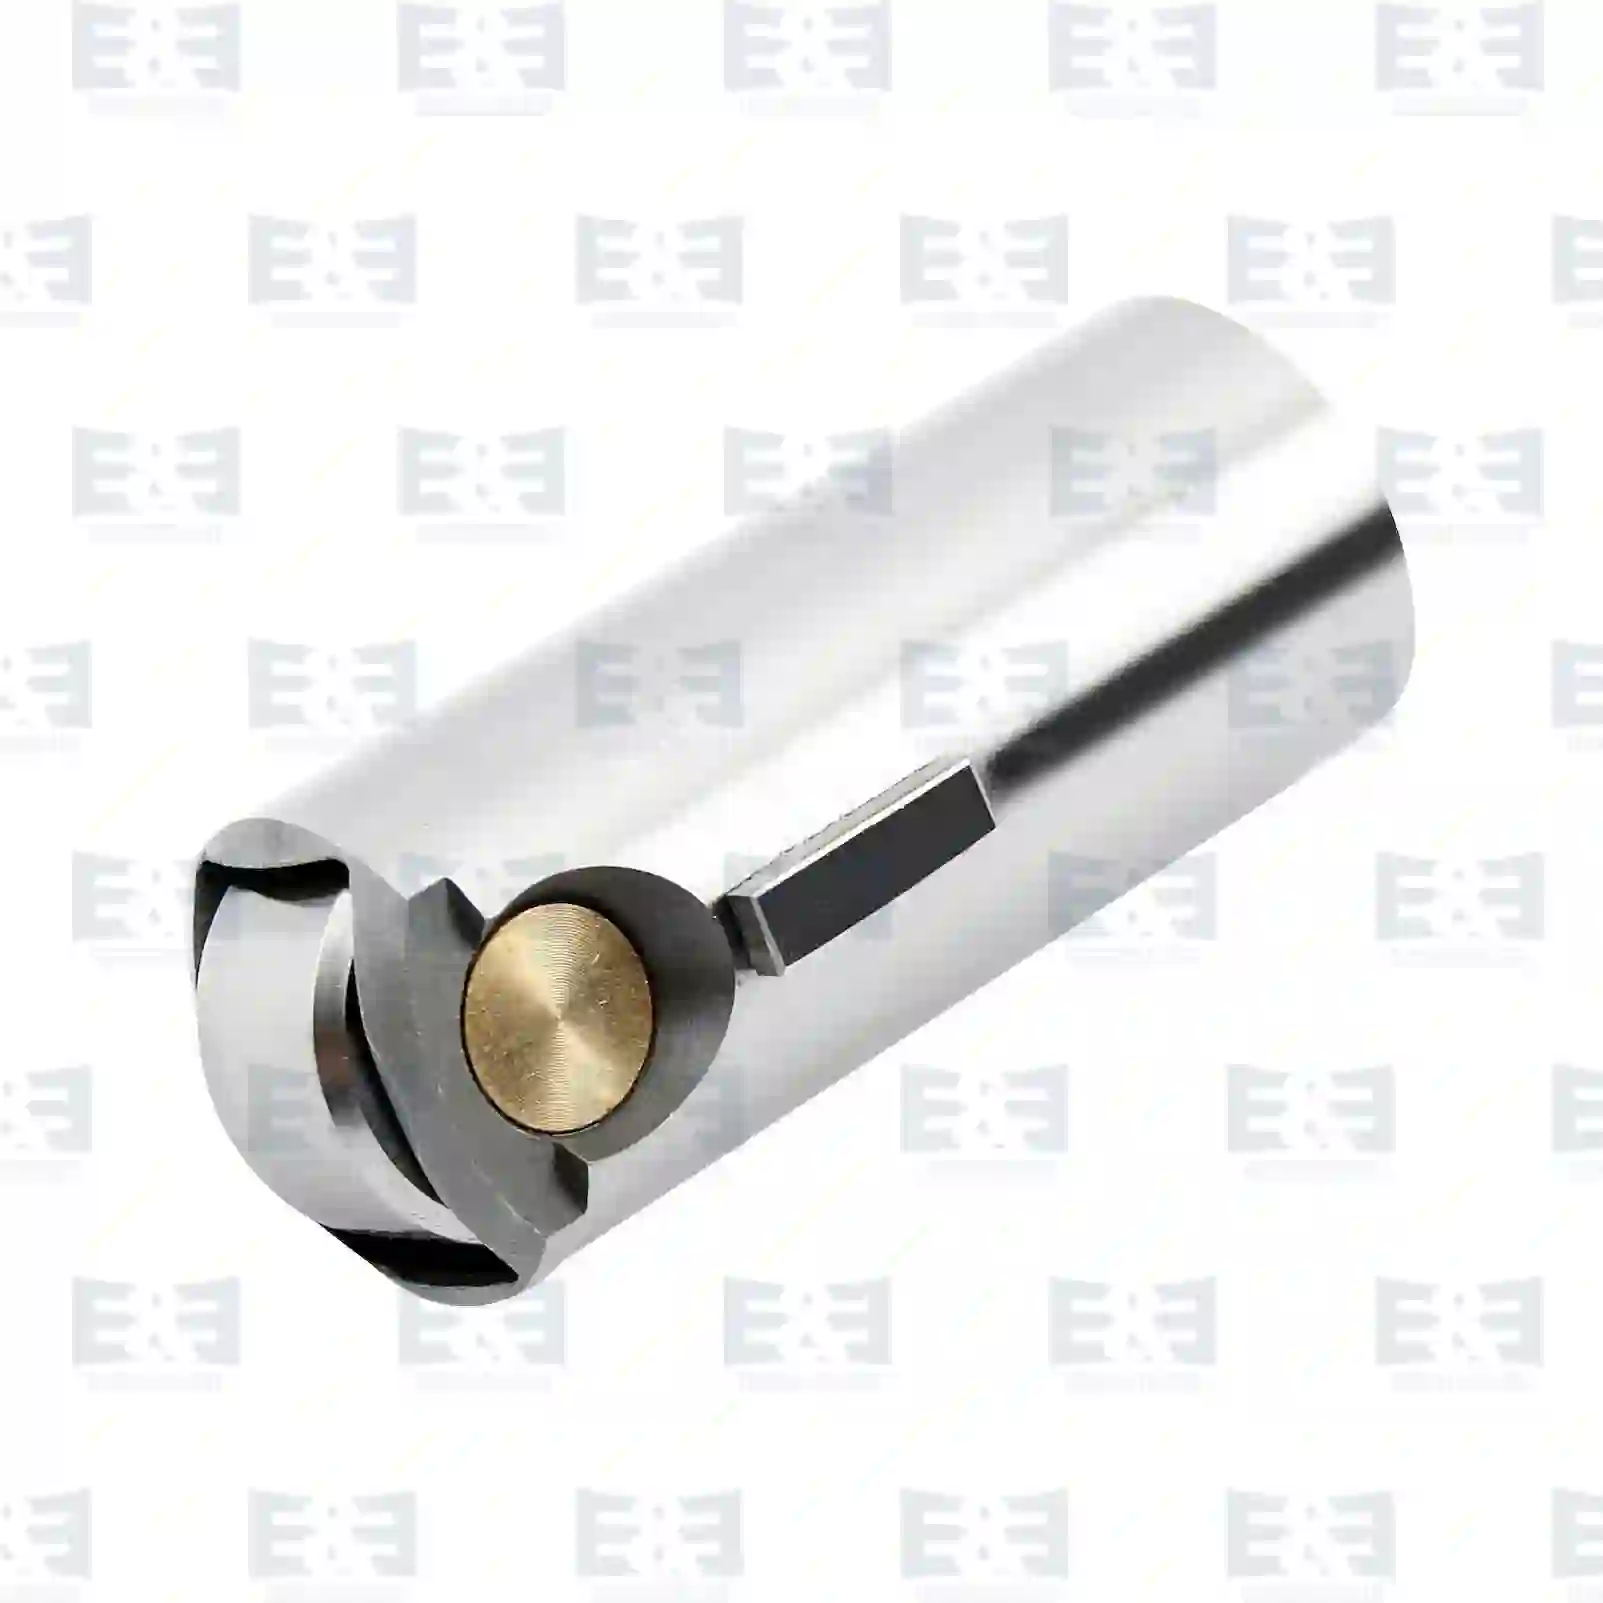 Camshaft Roller tappet, EE No 2E2200627 ,  oem no:5410500222, 5410500322, 5410500422, 5410500522, 5410500722, 5410500822, 5410500922, 5410501122, 5410501222, 5410501322, 5410501522, 5410501722, ZG01956-0008 E&E Truck Spare Parts | Truck Spare Parts, Auotomotive Spare Parts